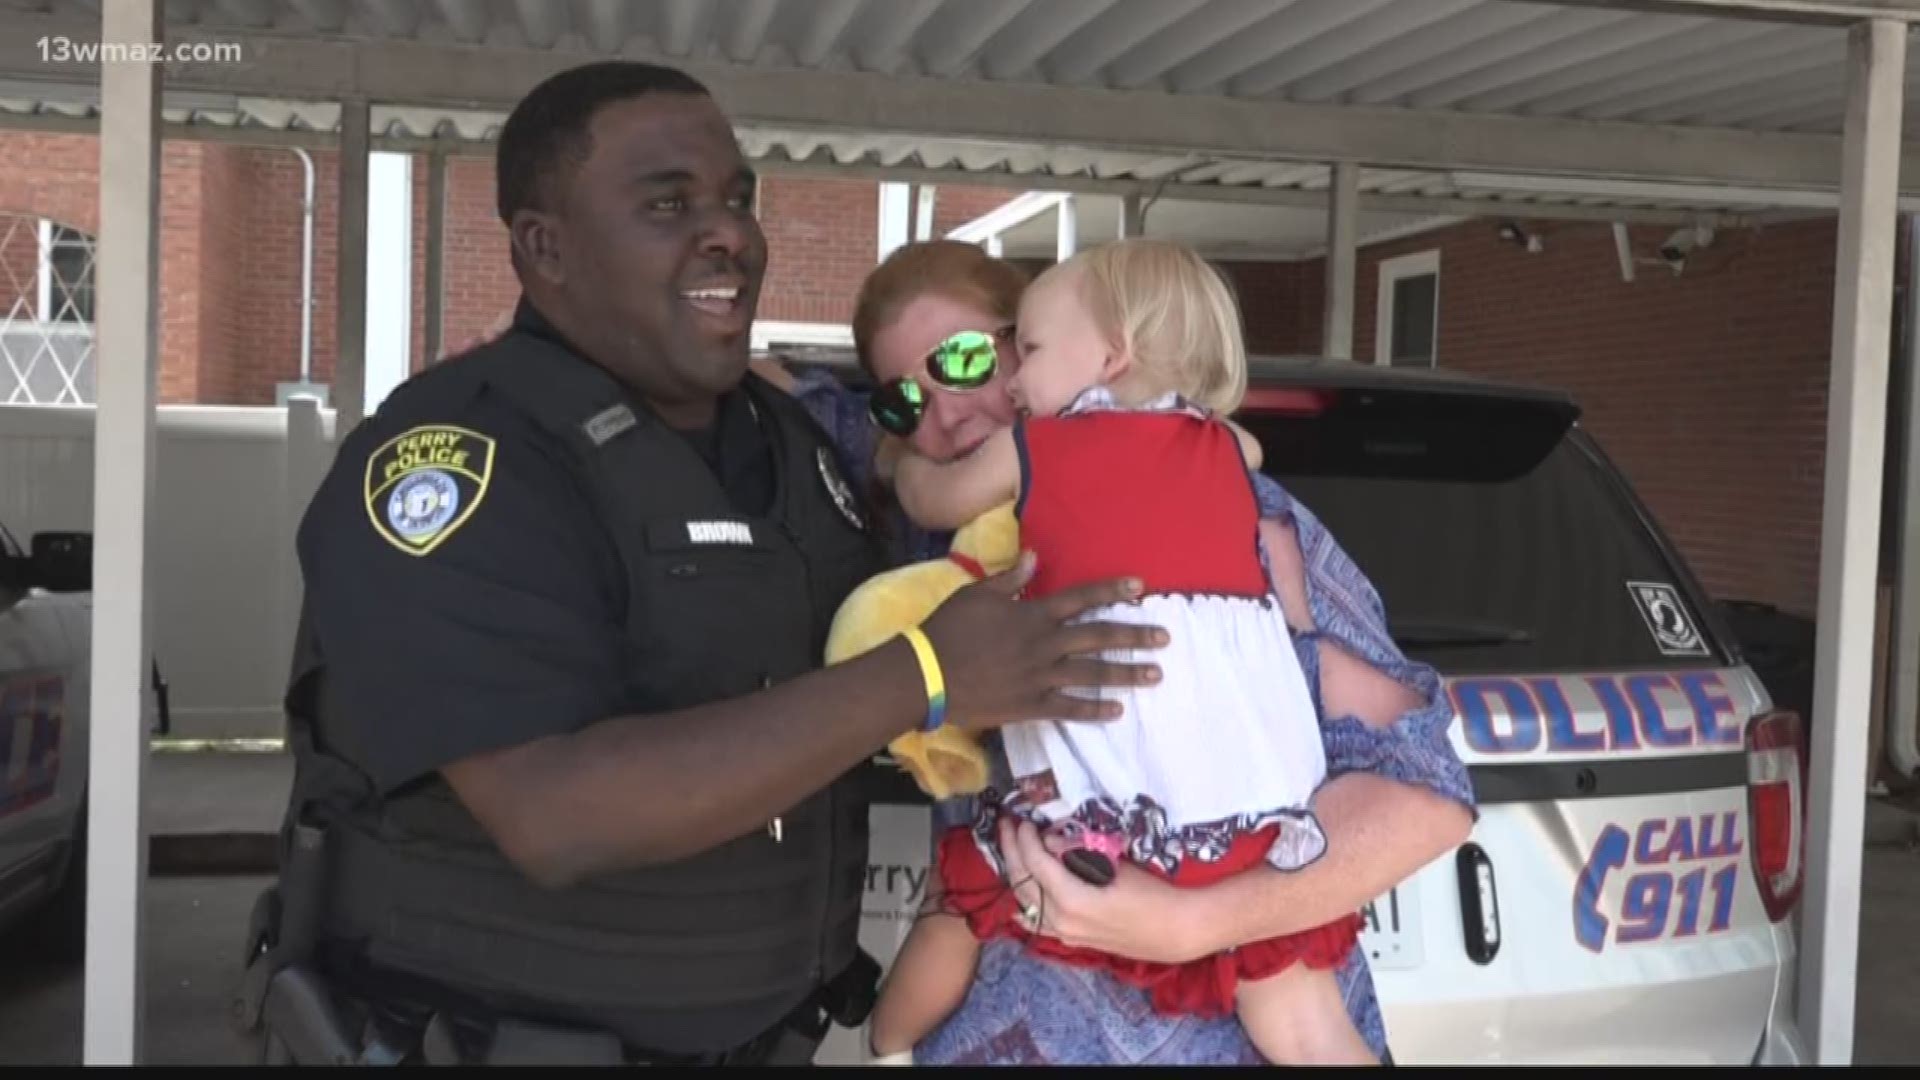 2-year-old Clara Shipes received her newest best friend from Perry Police Officer Josh Brown, who gave it to her at the Perry Independence Day Parade. Now Shipes takes 'Biscuit the Dog' everywhere.